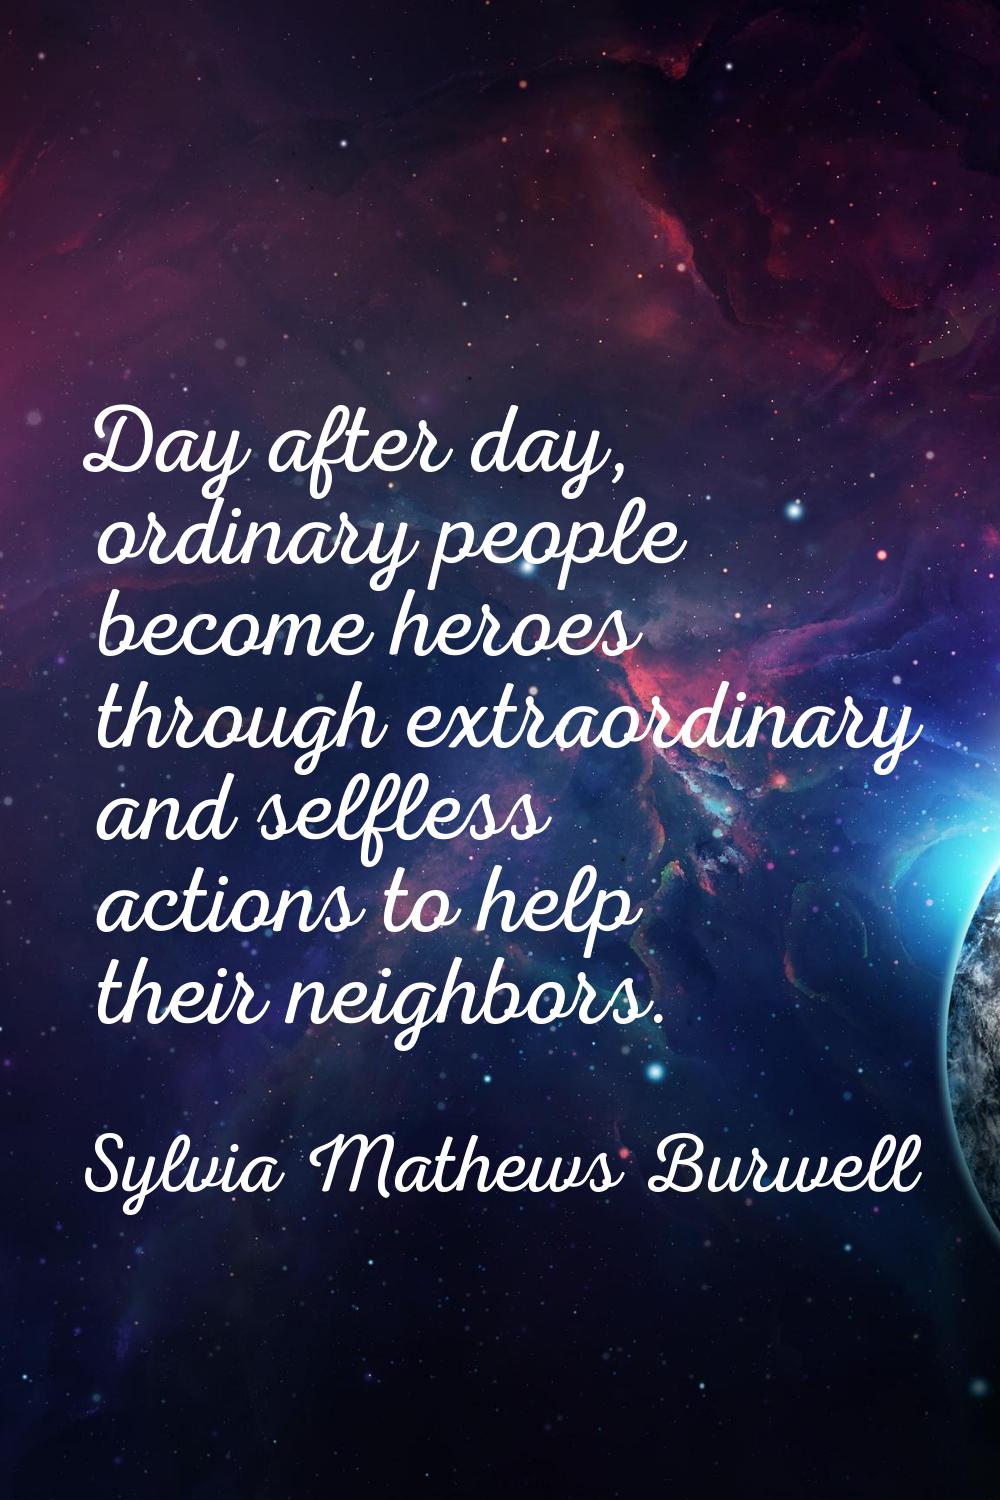 Day after day, ordinary people become heroes through extraordinary and selfless actions to help the